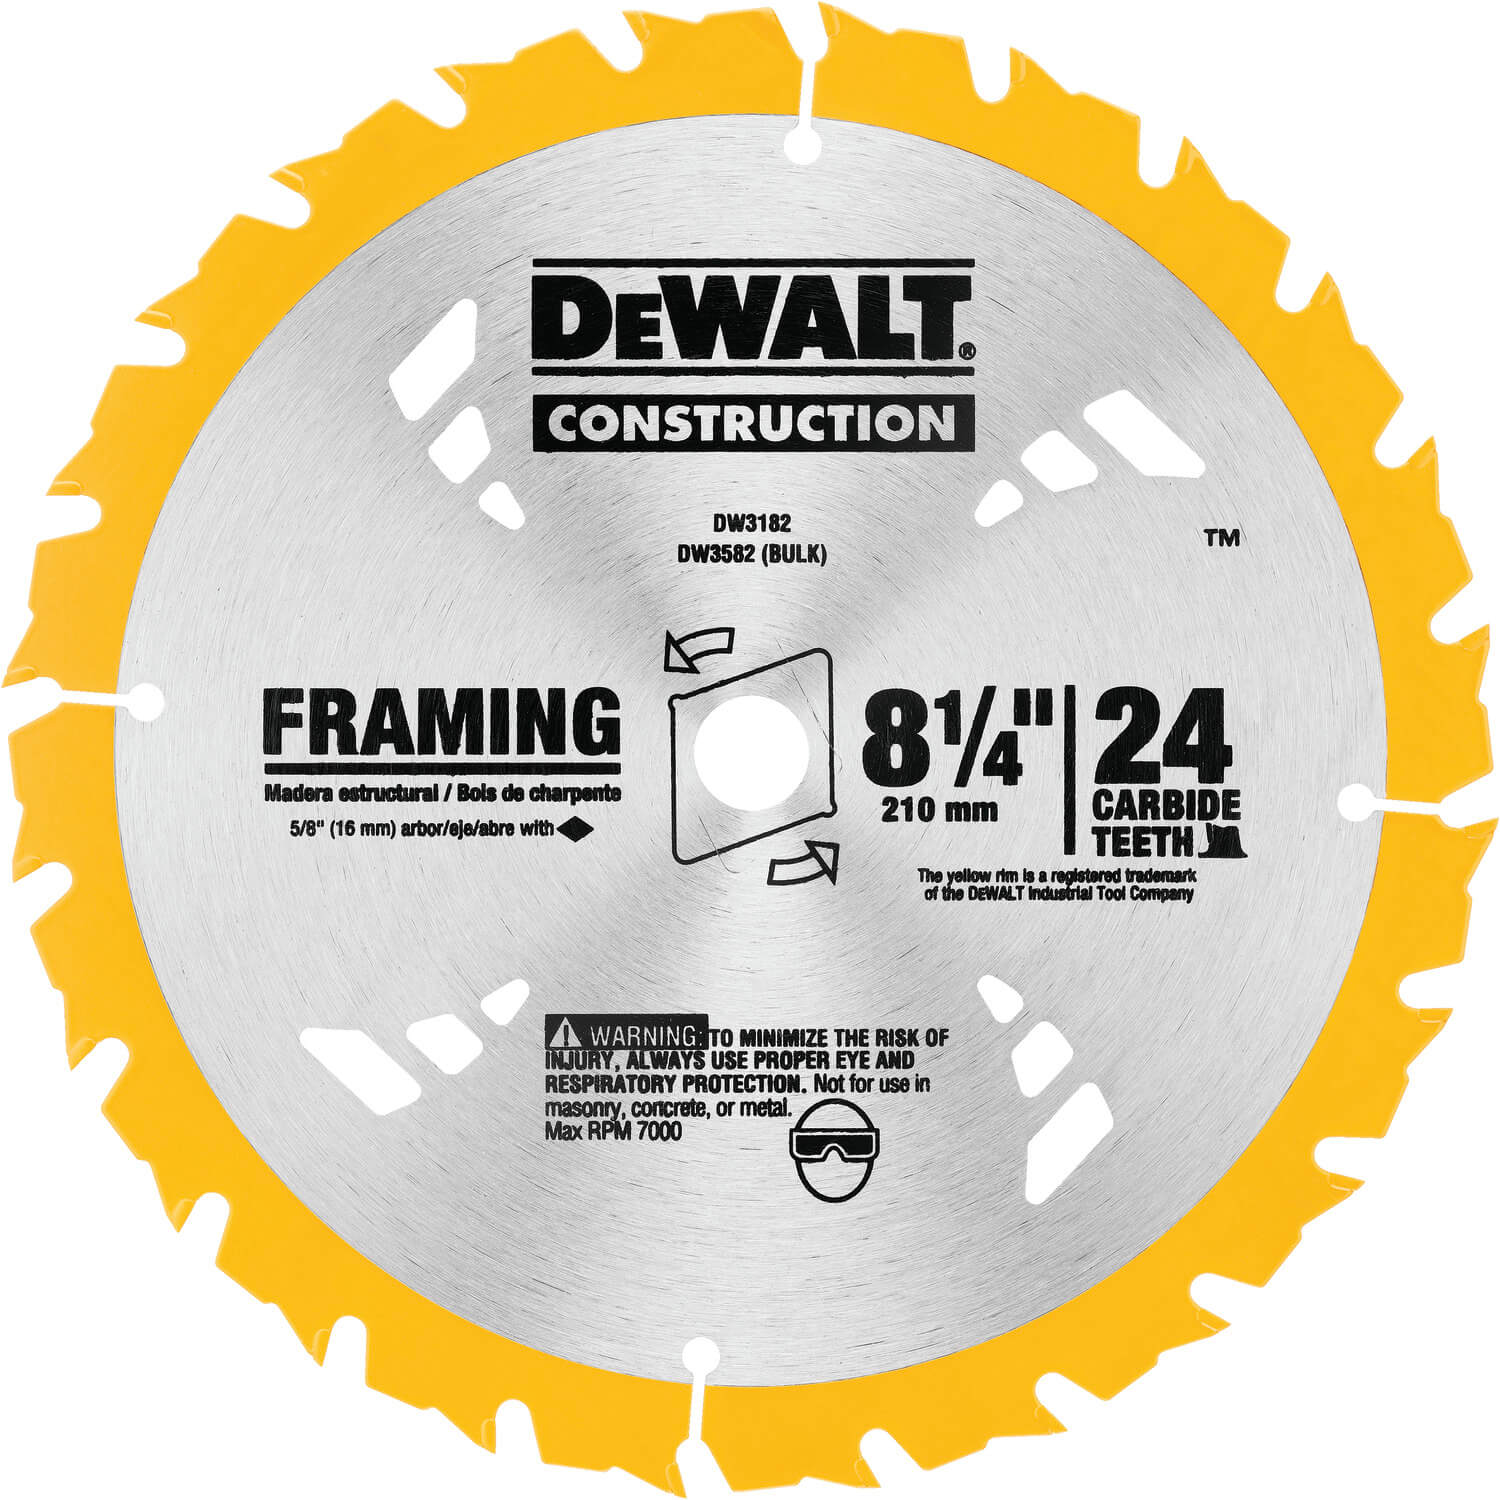 DEWALT DW3182 Series 20 8-1/4-Inch 24 Tooth ATB Framing Saw Blade with 5/8-Inch Arbor - wise-line-tools